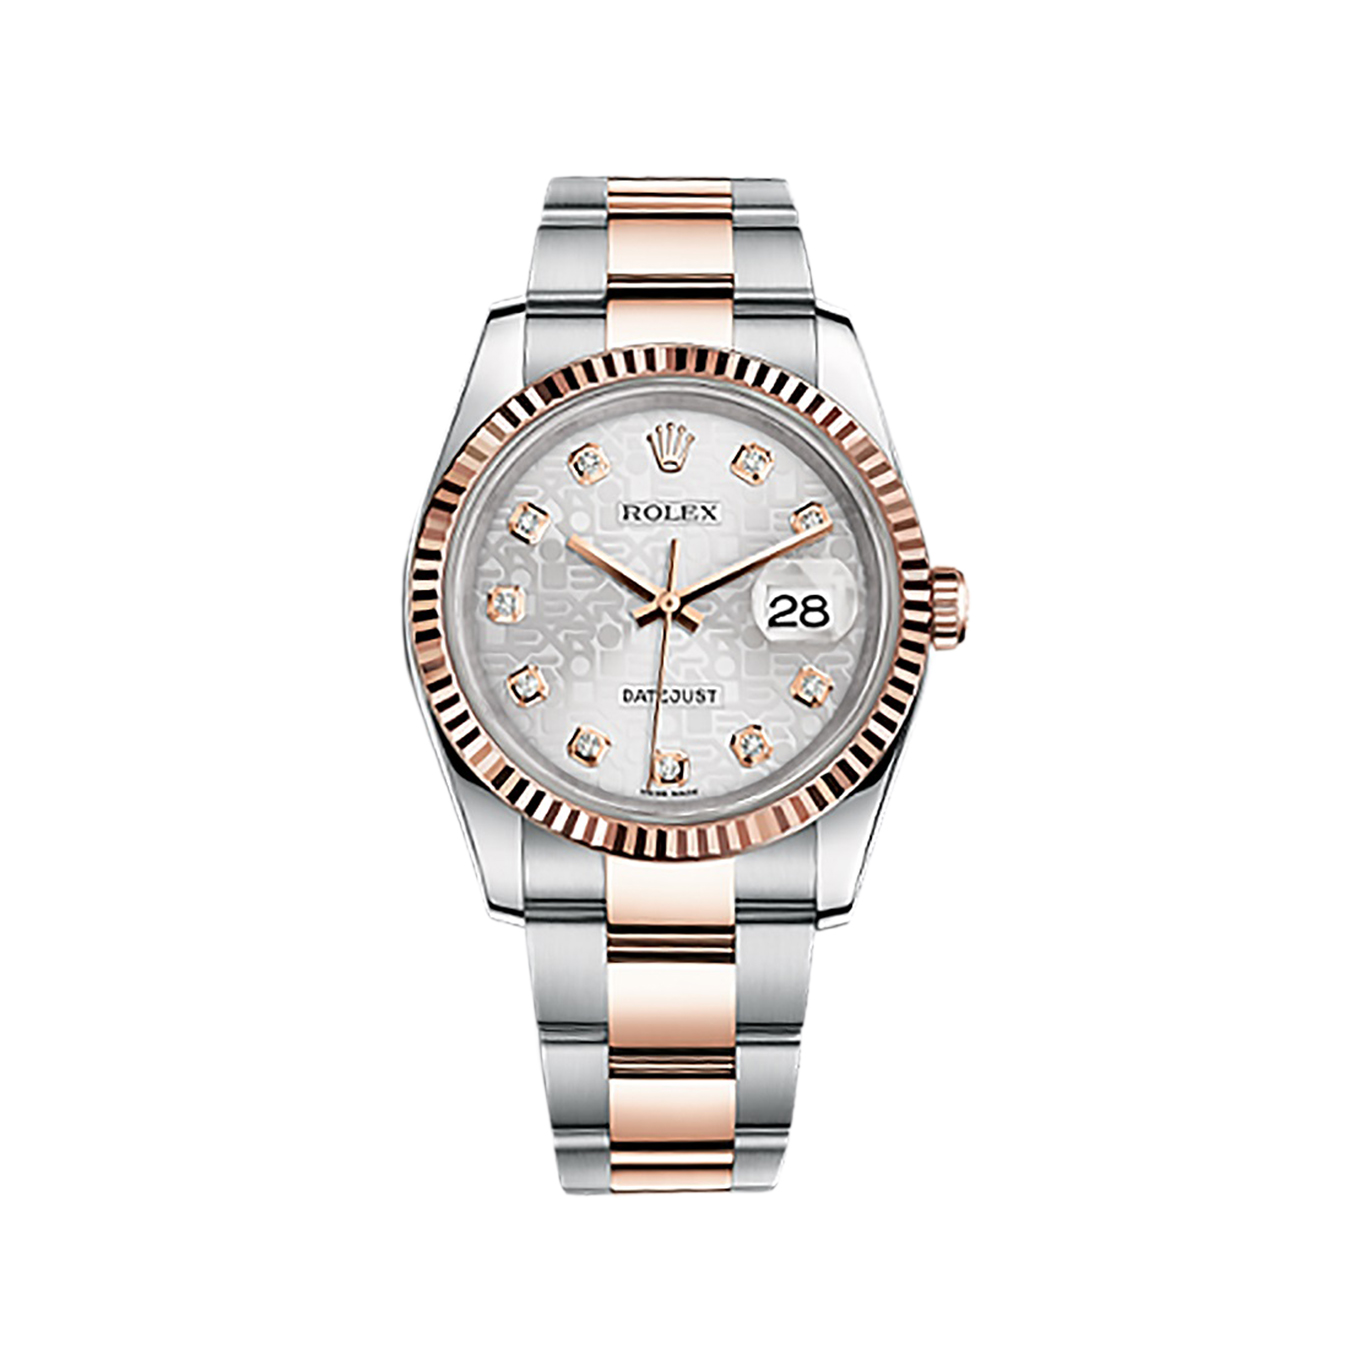 Datejust 36 116231 Rose Gold & Stainless Steel Watch (Silver Jubilee Design Set with Diamonds)